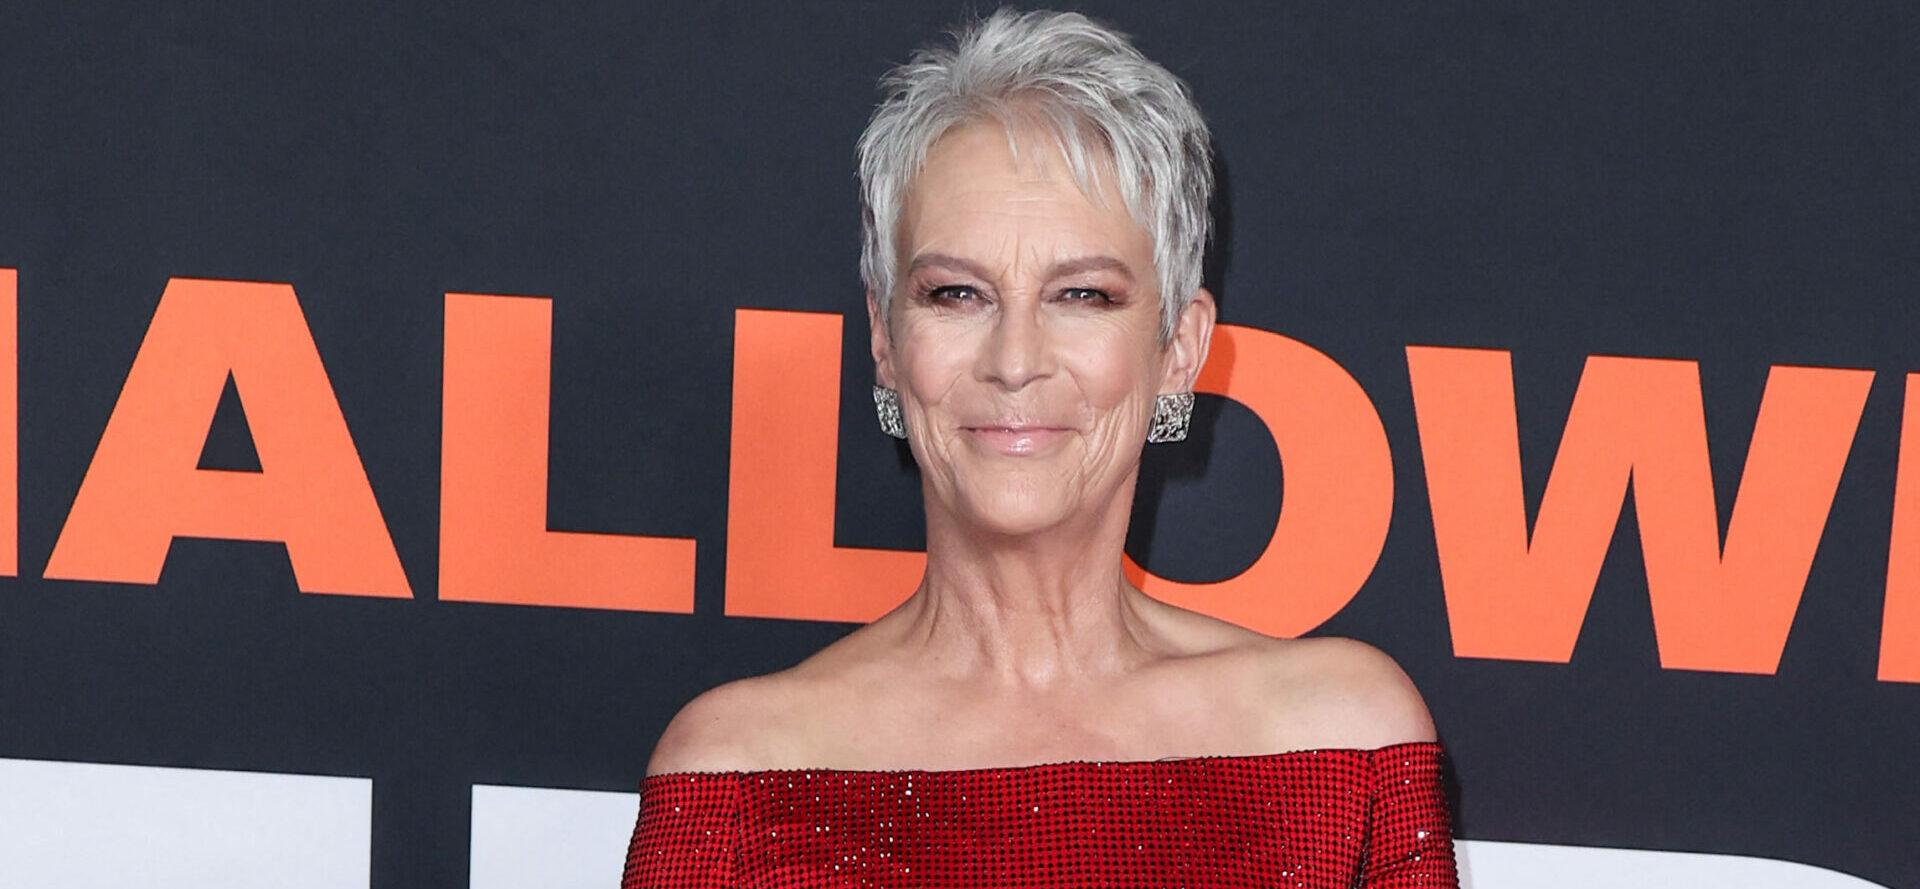 Jamie Lee Curtis World Premiere Of Universal Pictures And Blumhouse Productions' 'Halloween Ends'